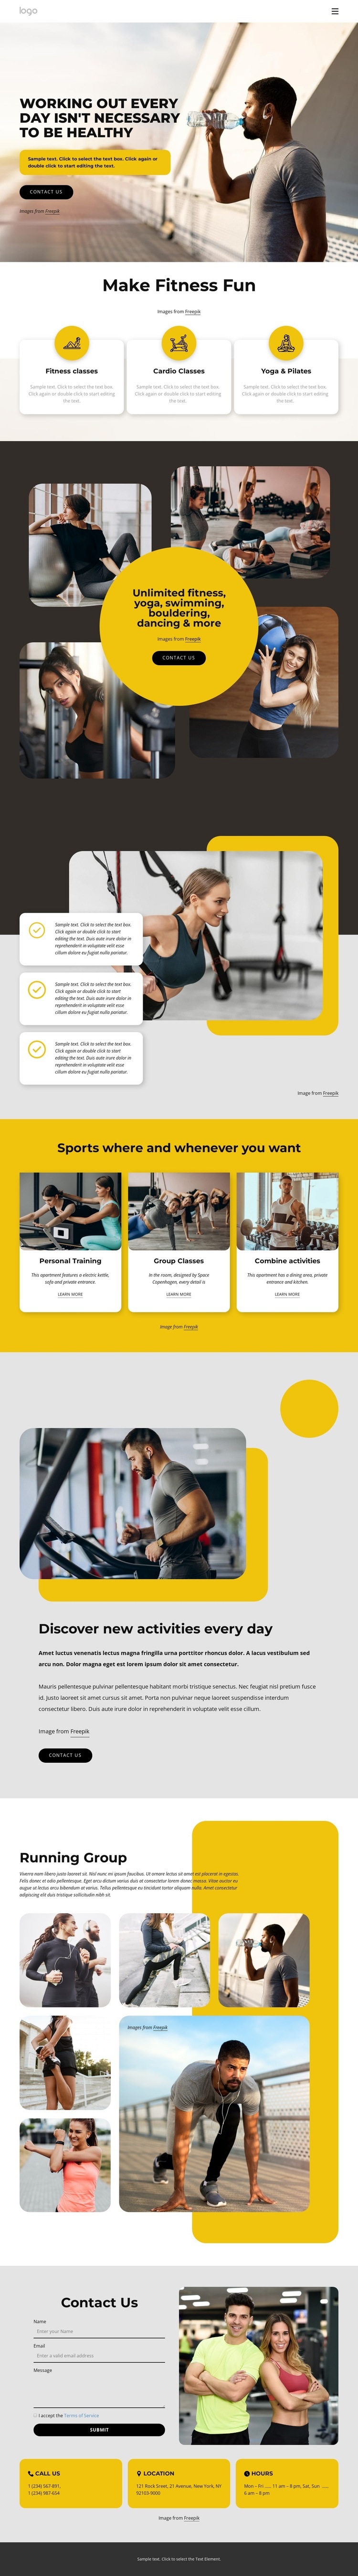 Book your workout Web Page Design